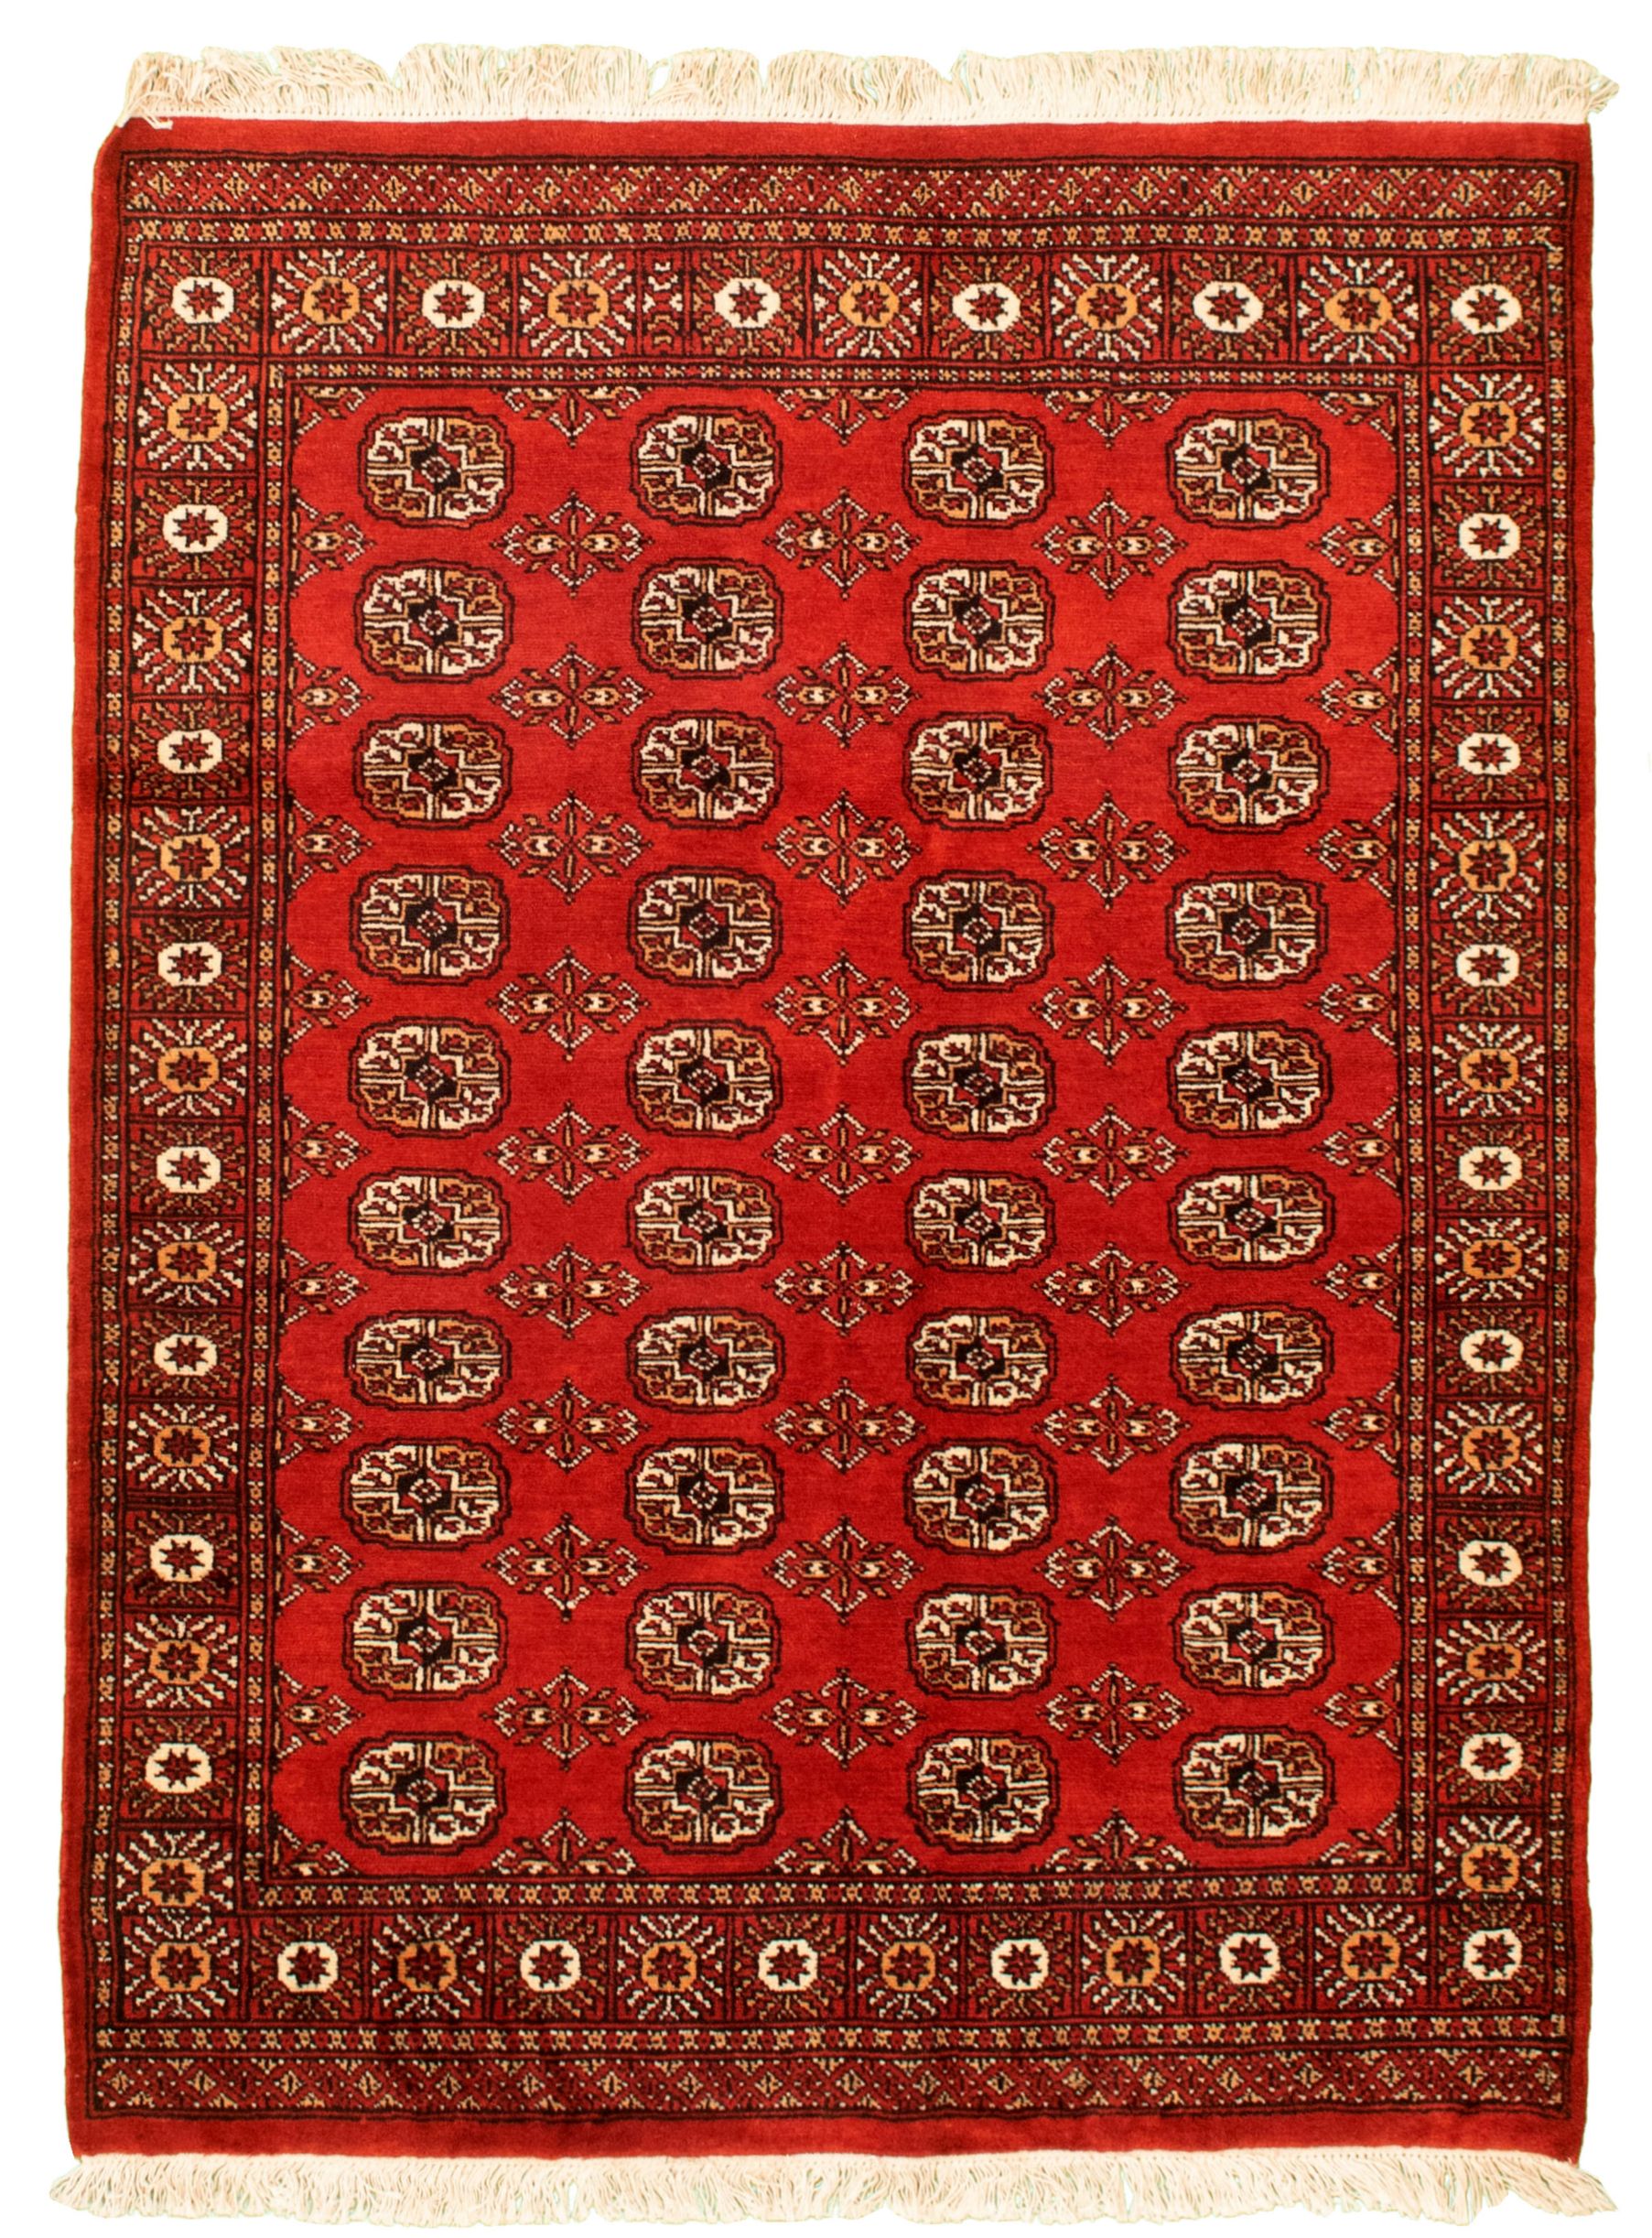 Hand-knotted Finest Peshawar Bokhara Red Wool Rug 4'1" x 5'7"  Size: 4'1" x 5'7"  